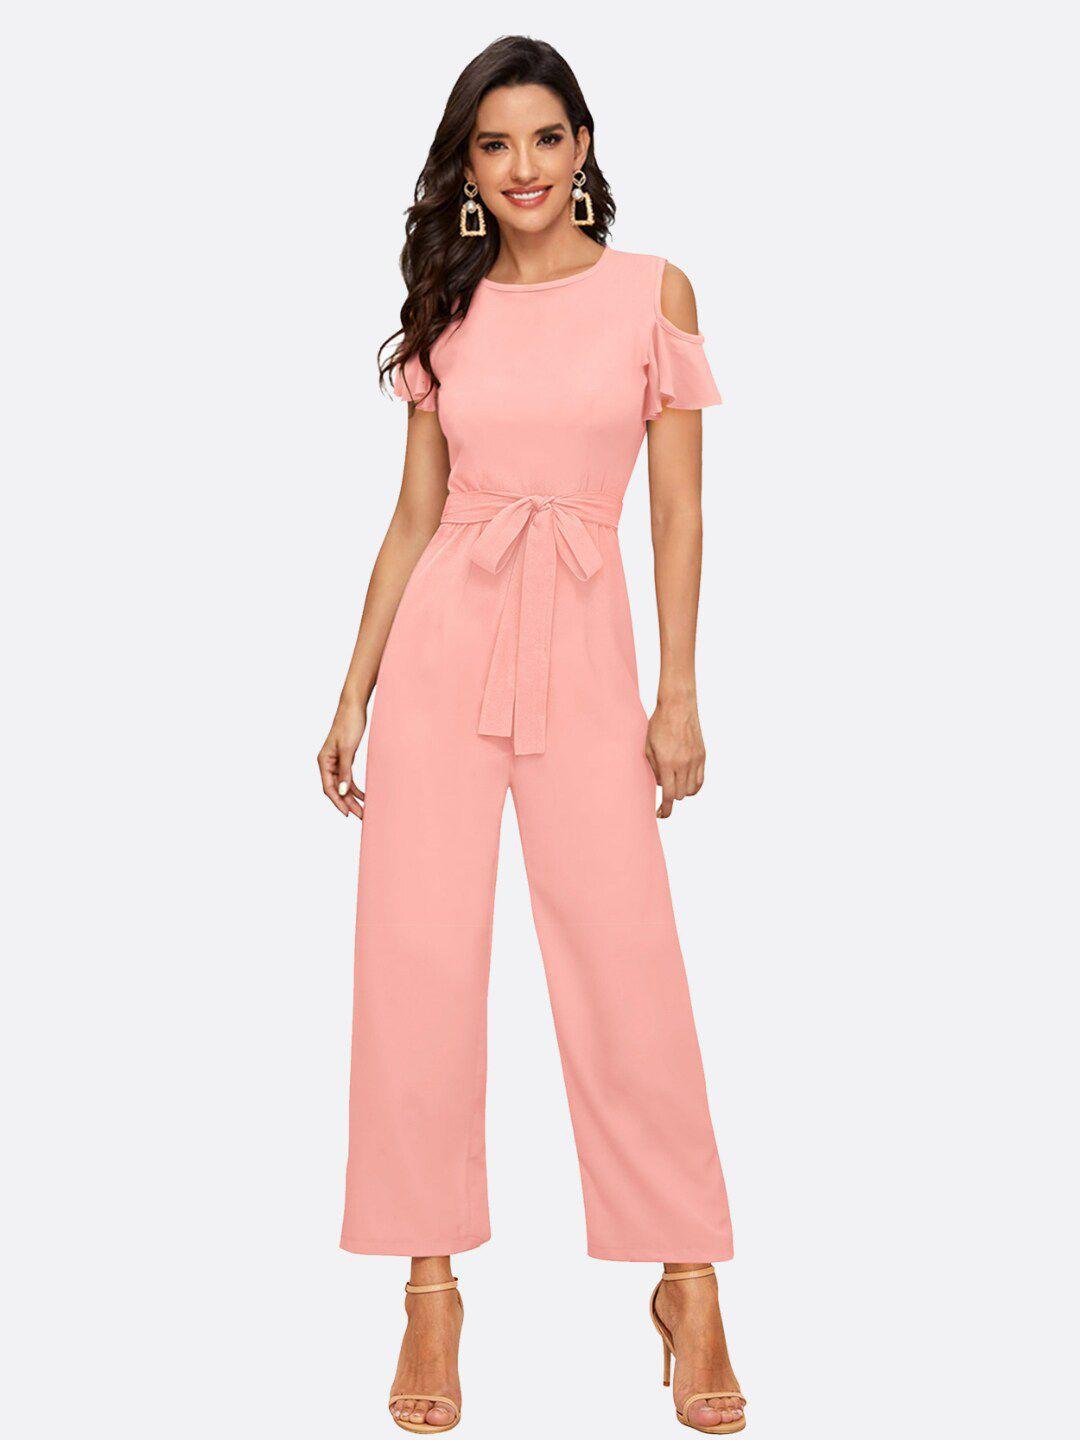 london belly women peach-colored basic jumpsuit